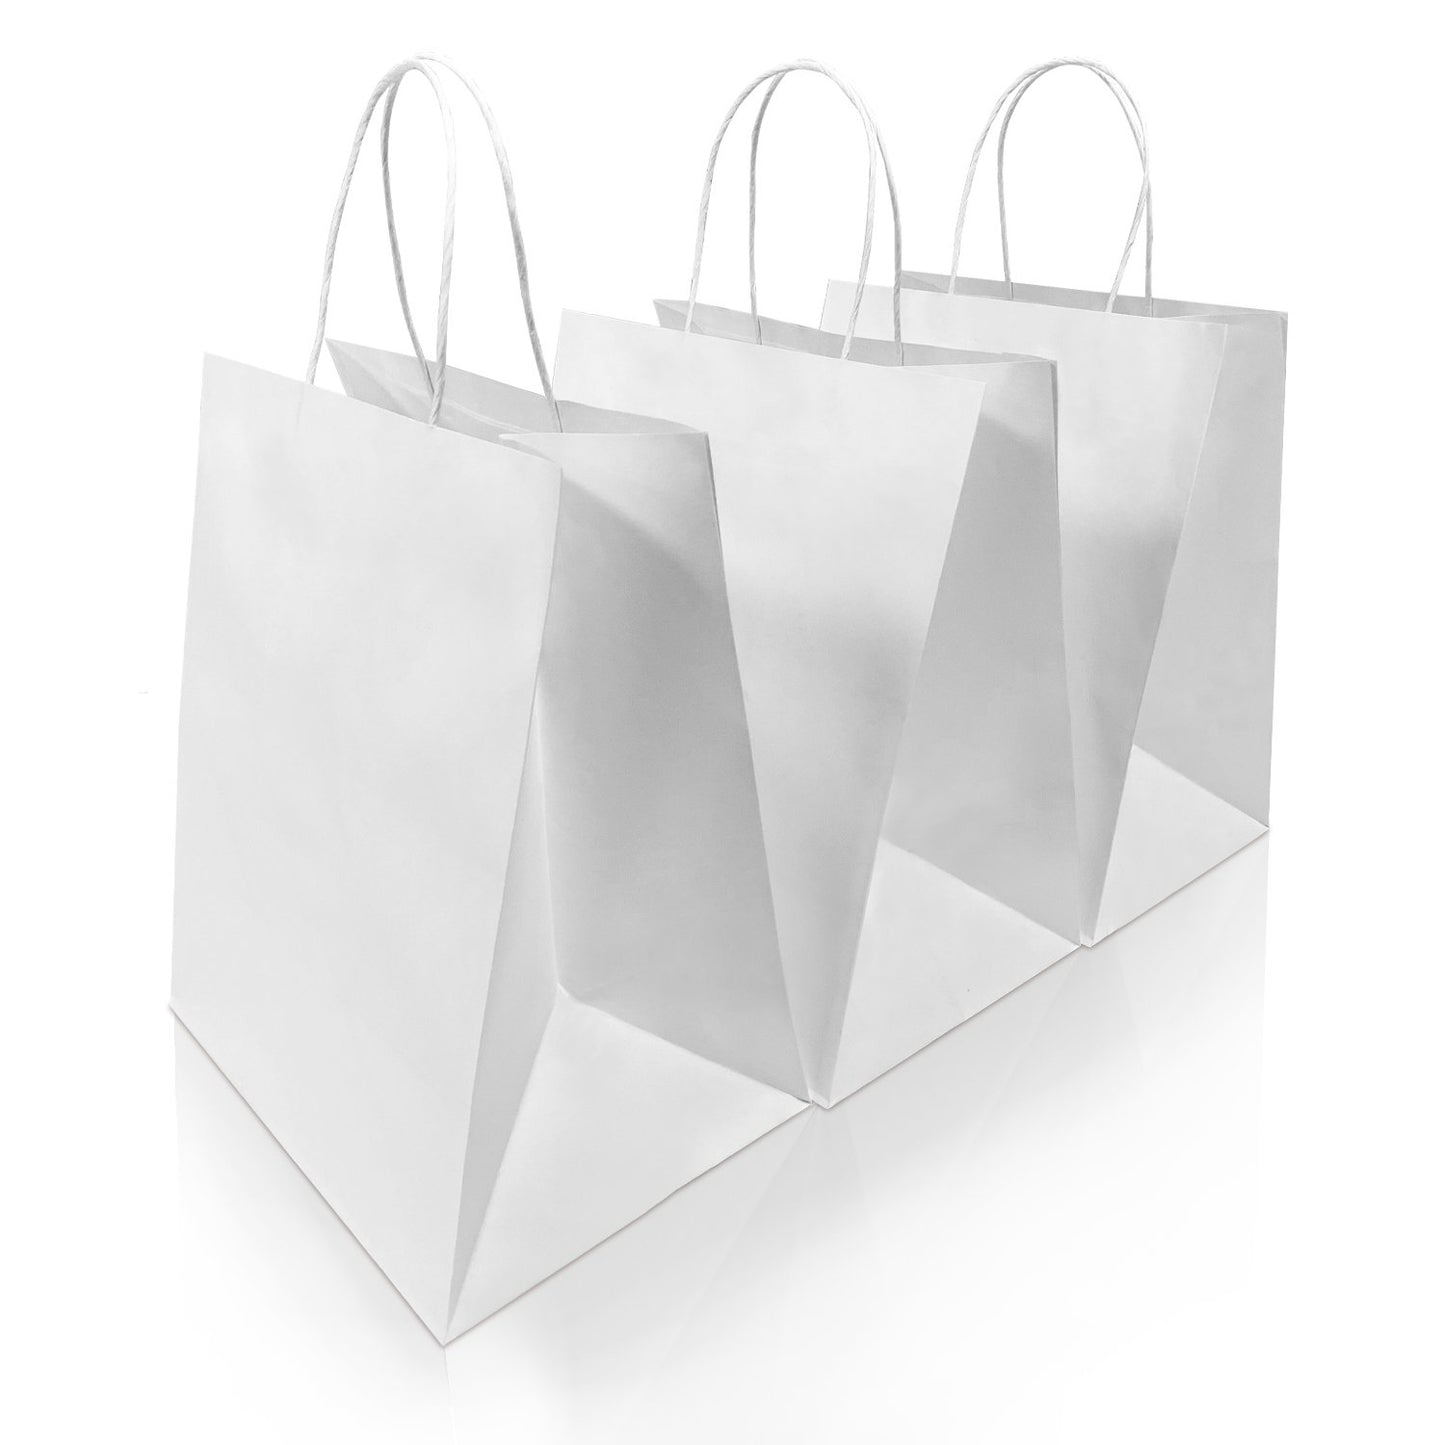 250 Pcs, Bistro, 10x6.75x12 inches, White Paper Bags, with Twisted Handle